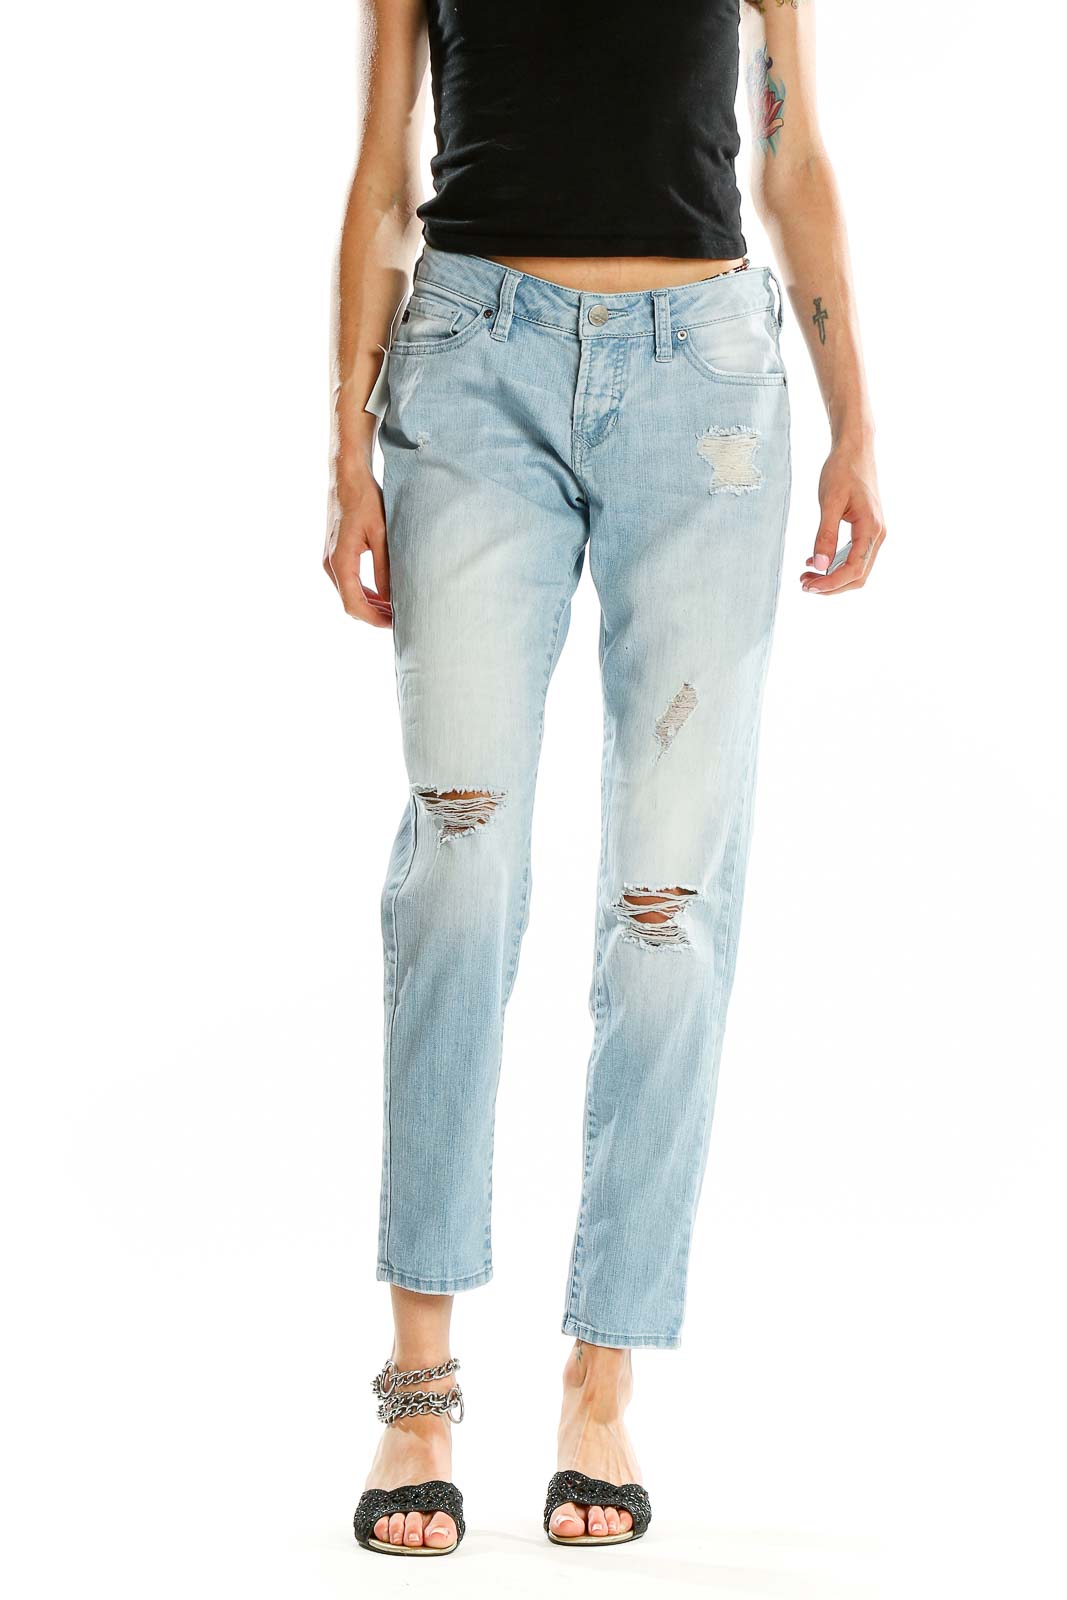 Blue Distressed Ripped Light Rinse Jeans Front